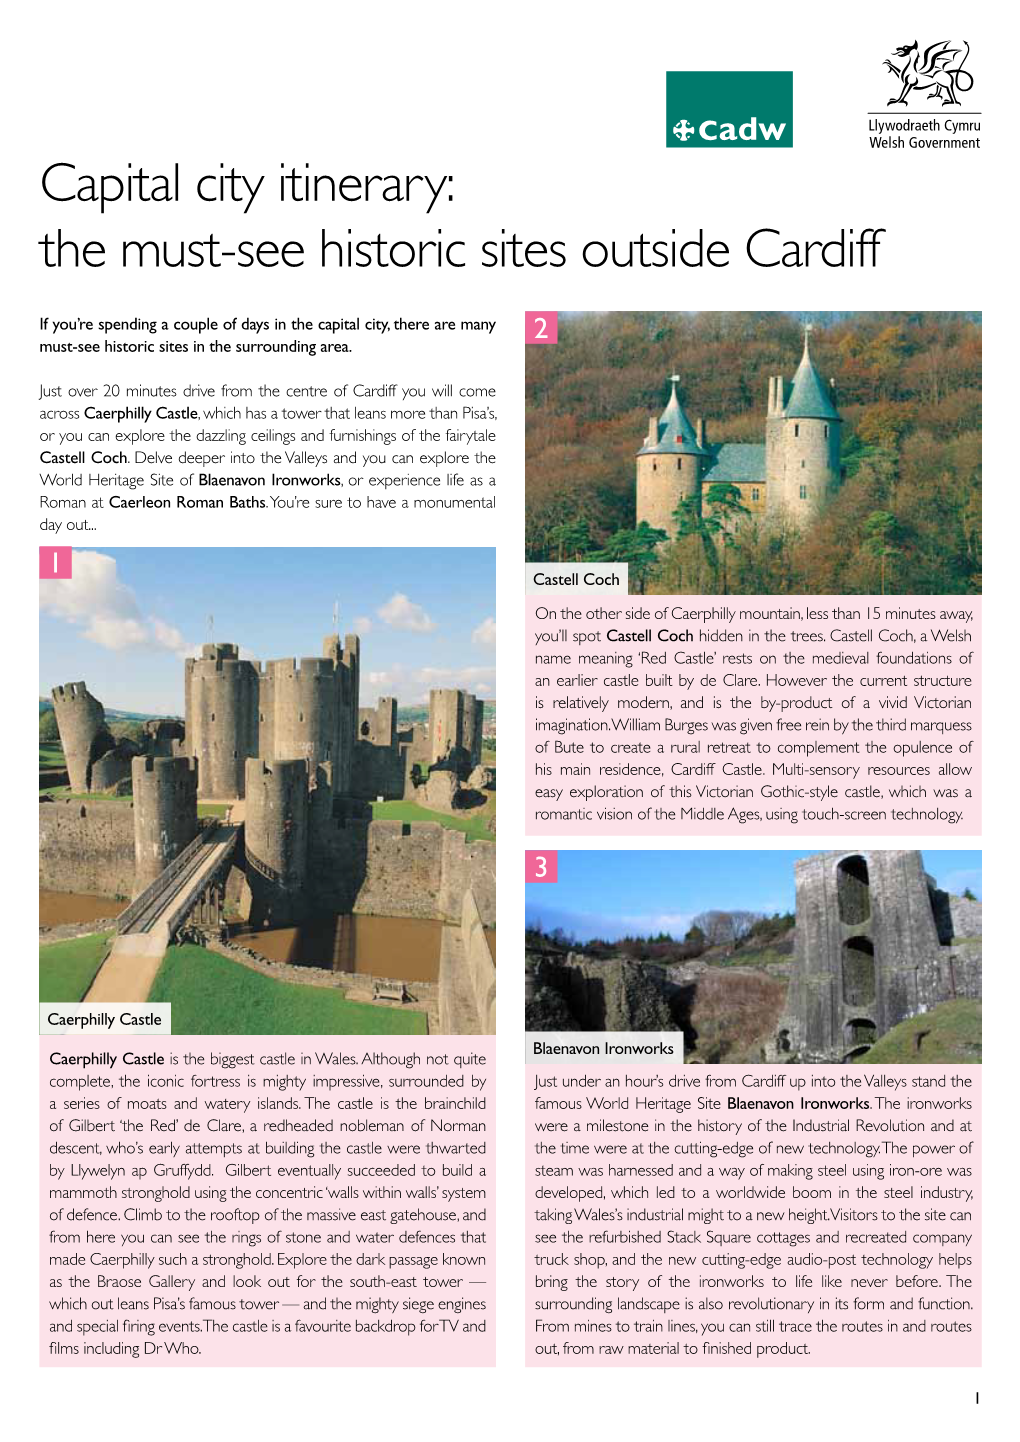 Capital City Itinerary: the Must-See Historic Sites Outside Cardiff